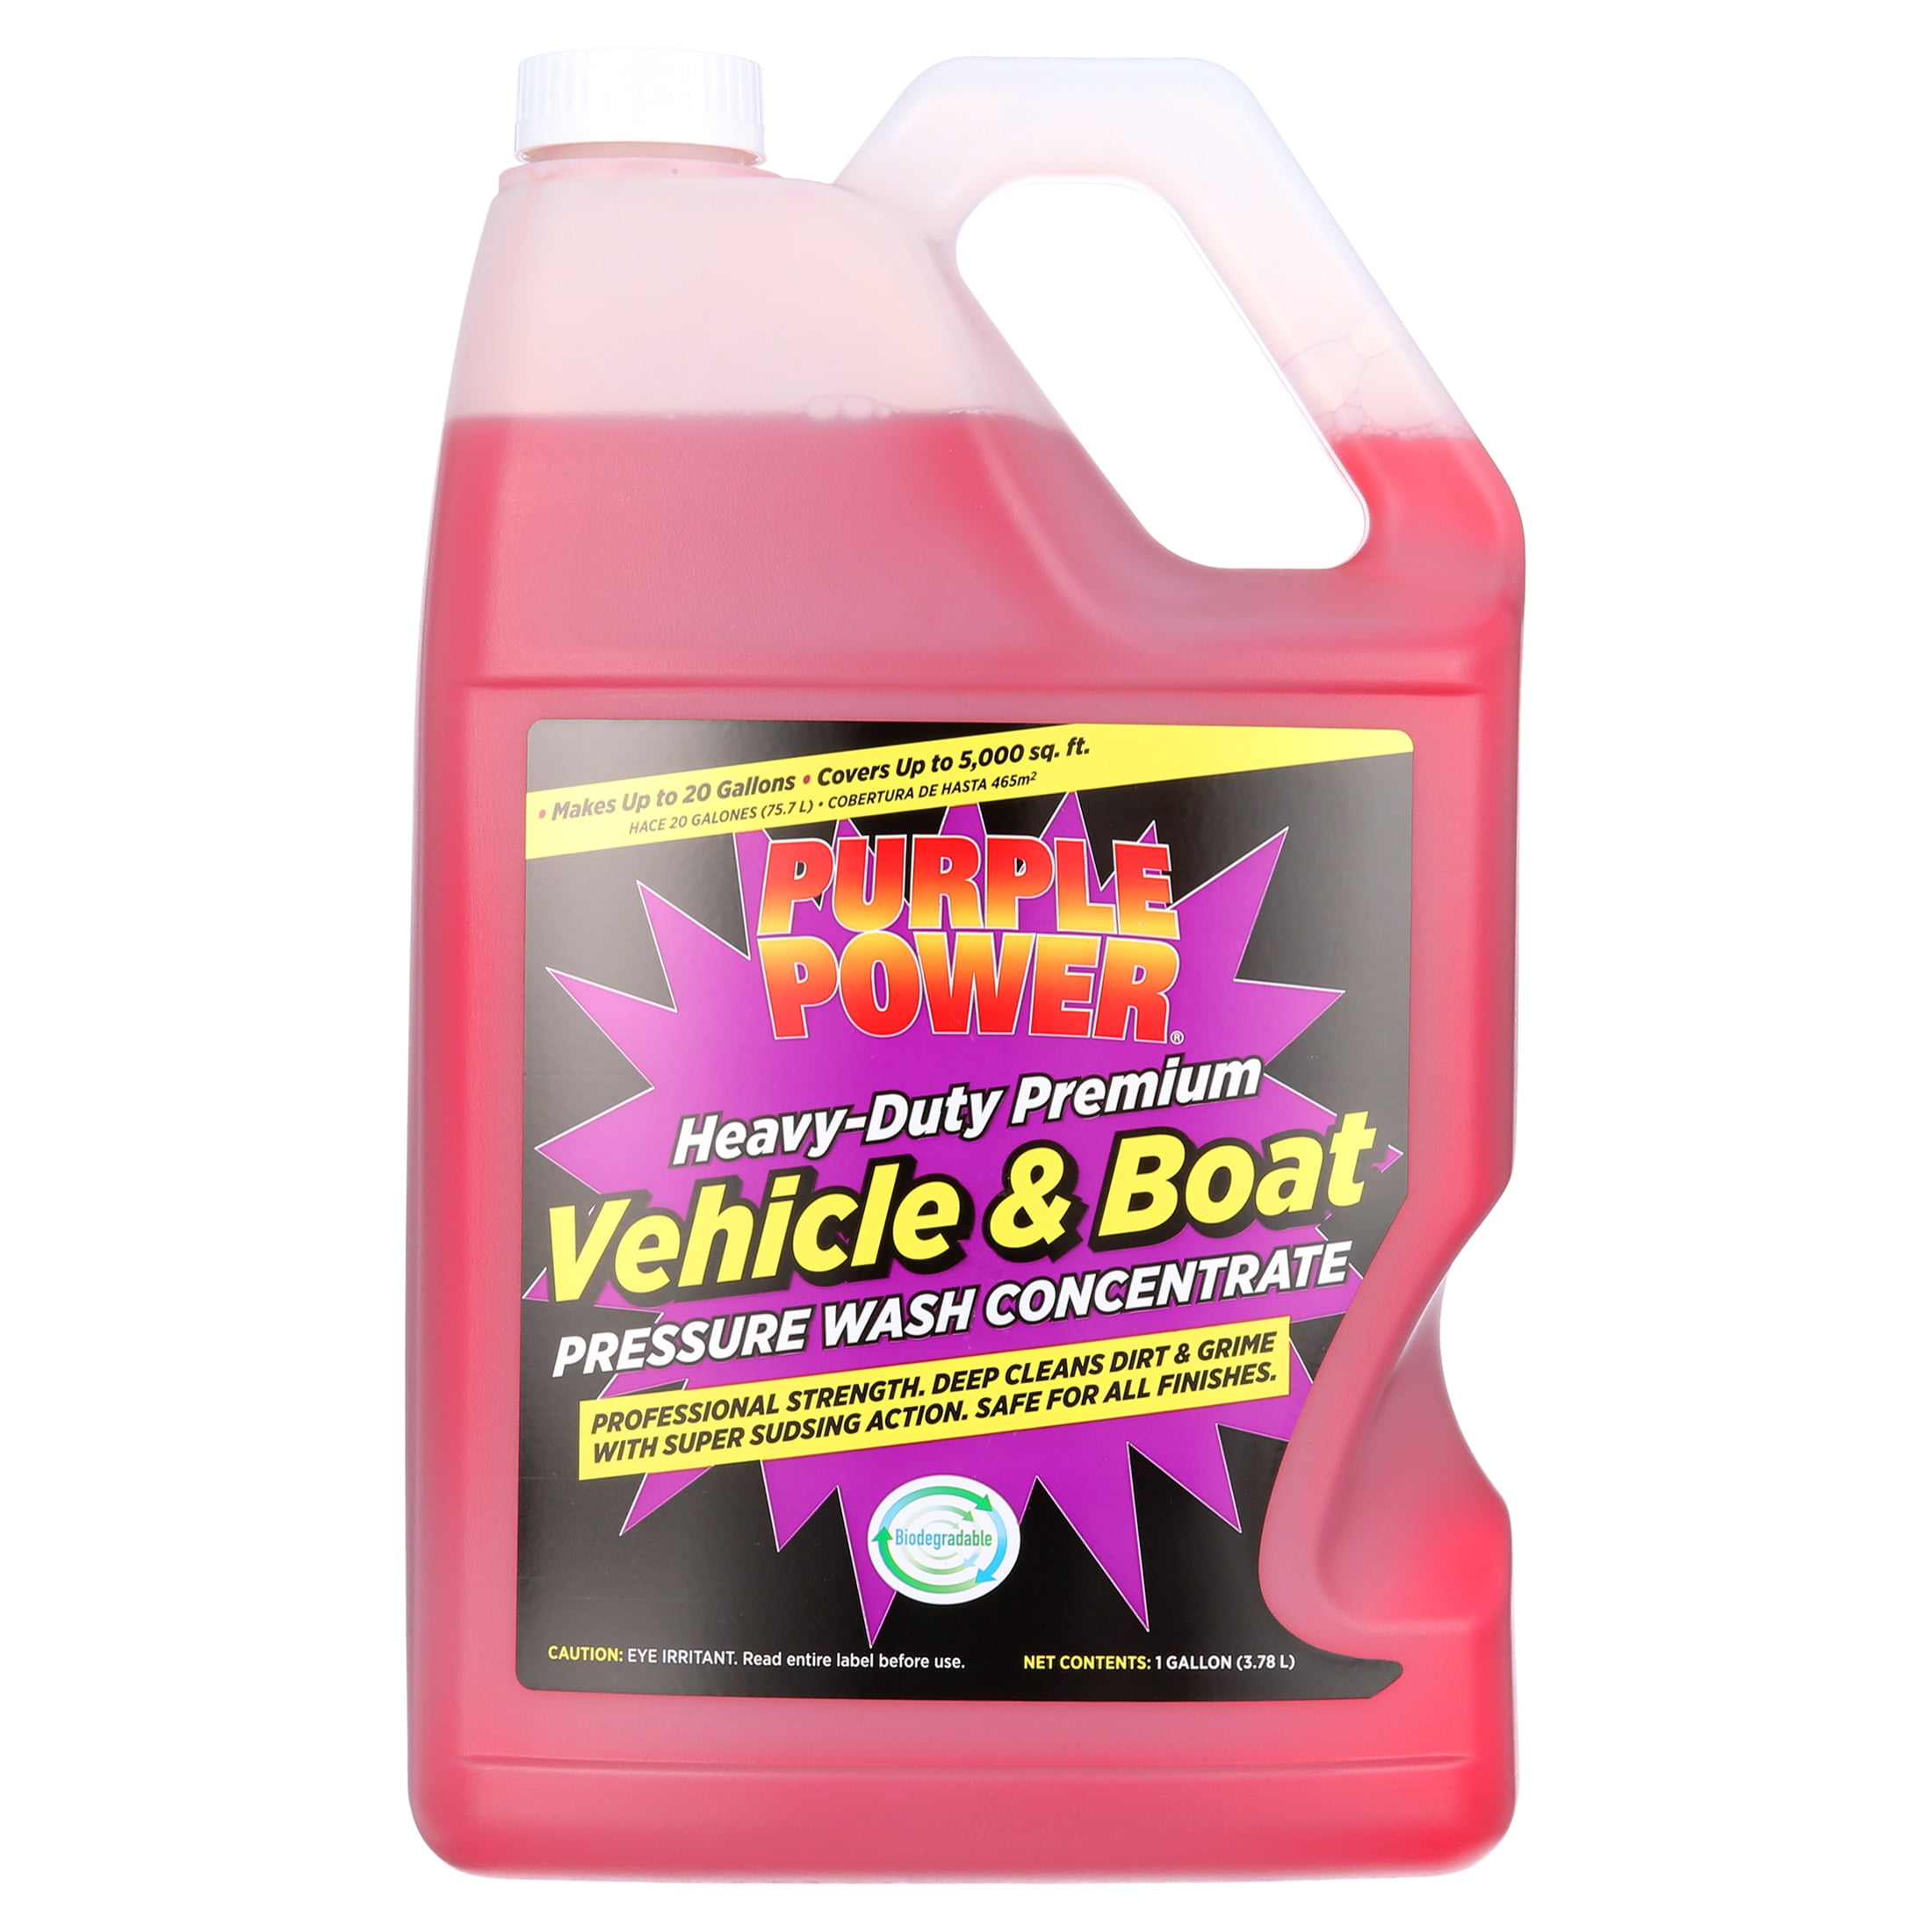 Purple Power Heavy-Duty Vehicle and Boat Pressure Washer fluid Concentrate, 1 Gallon By Aiken Chemical